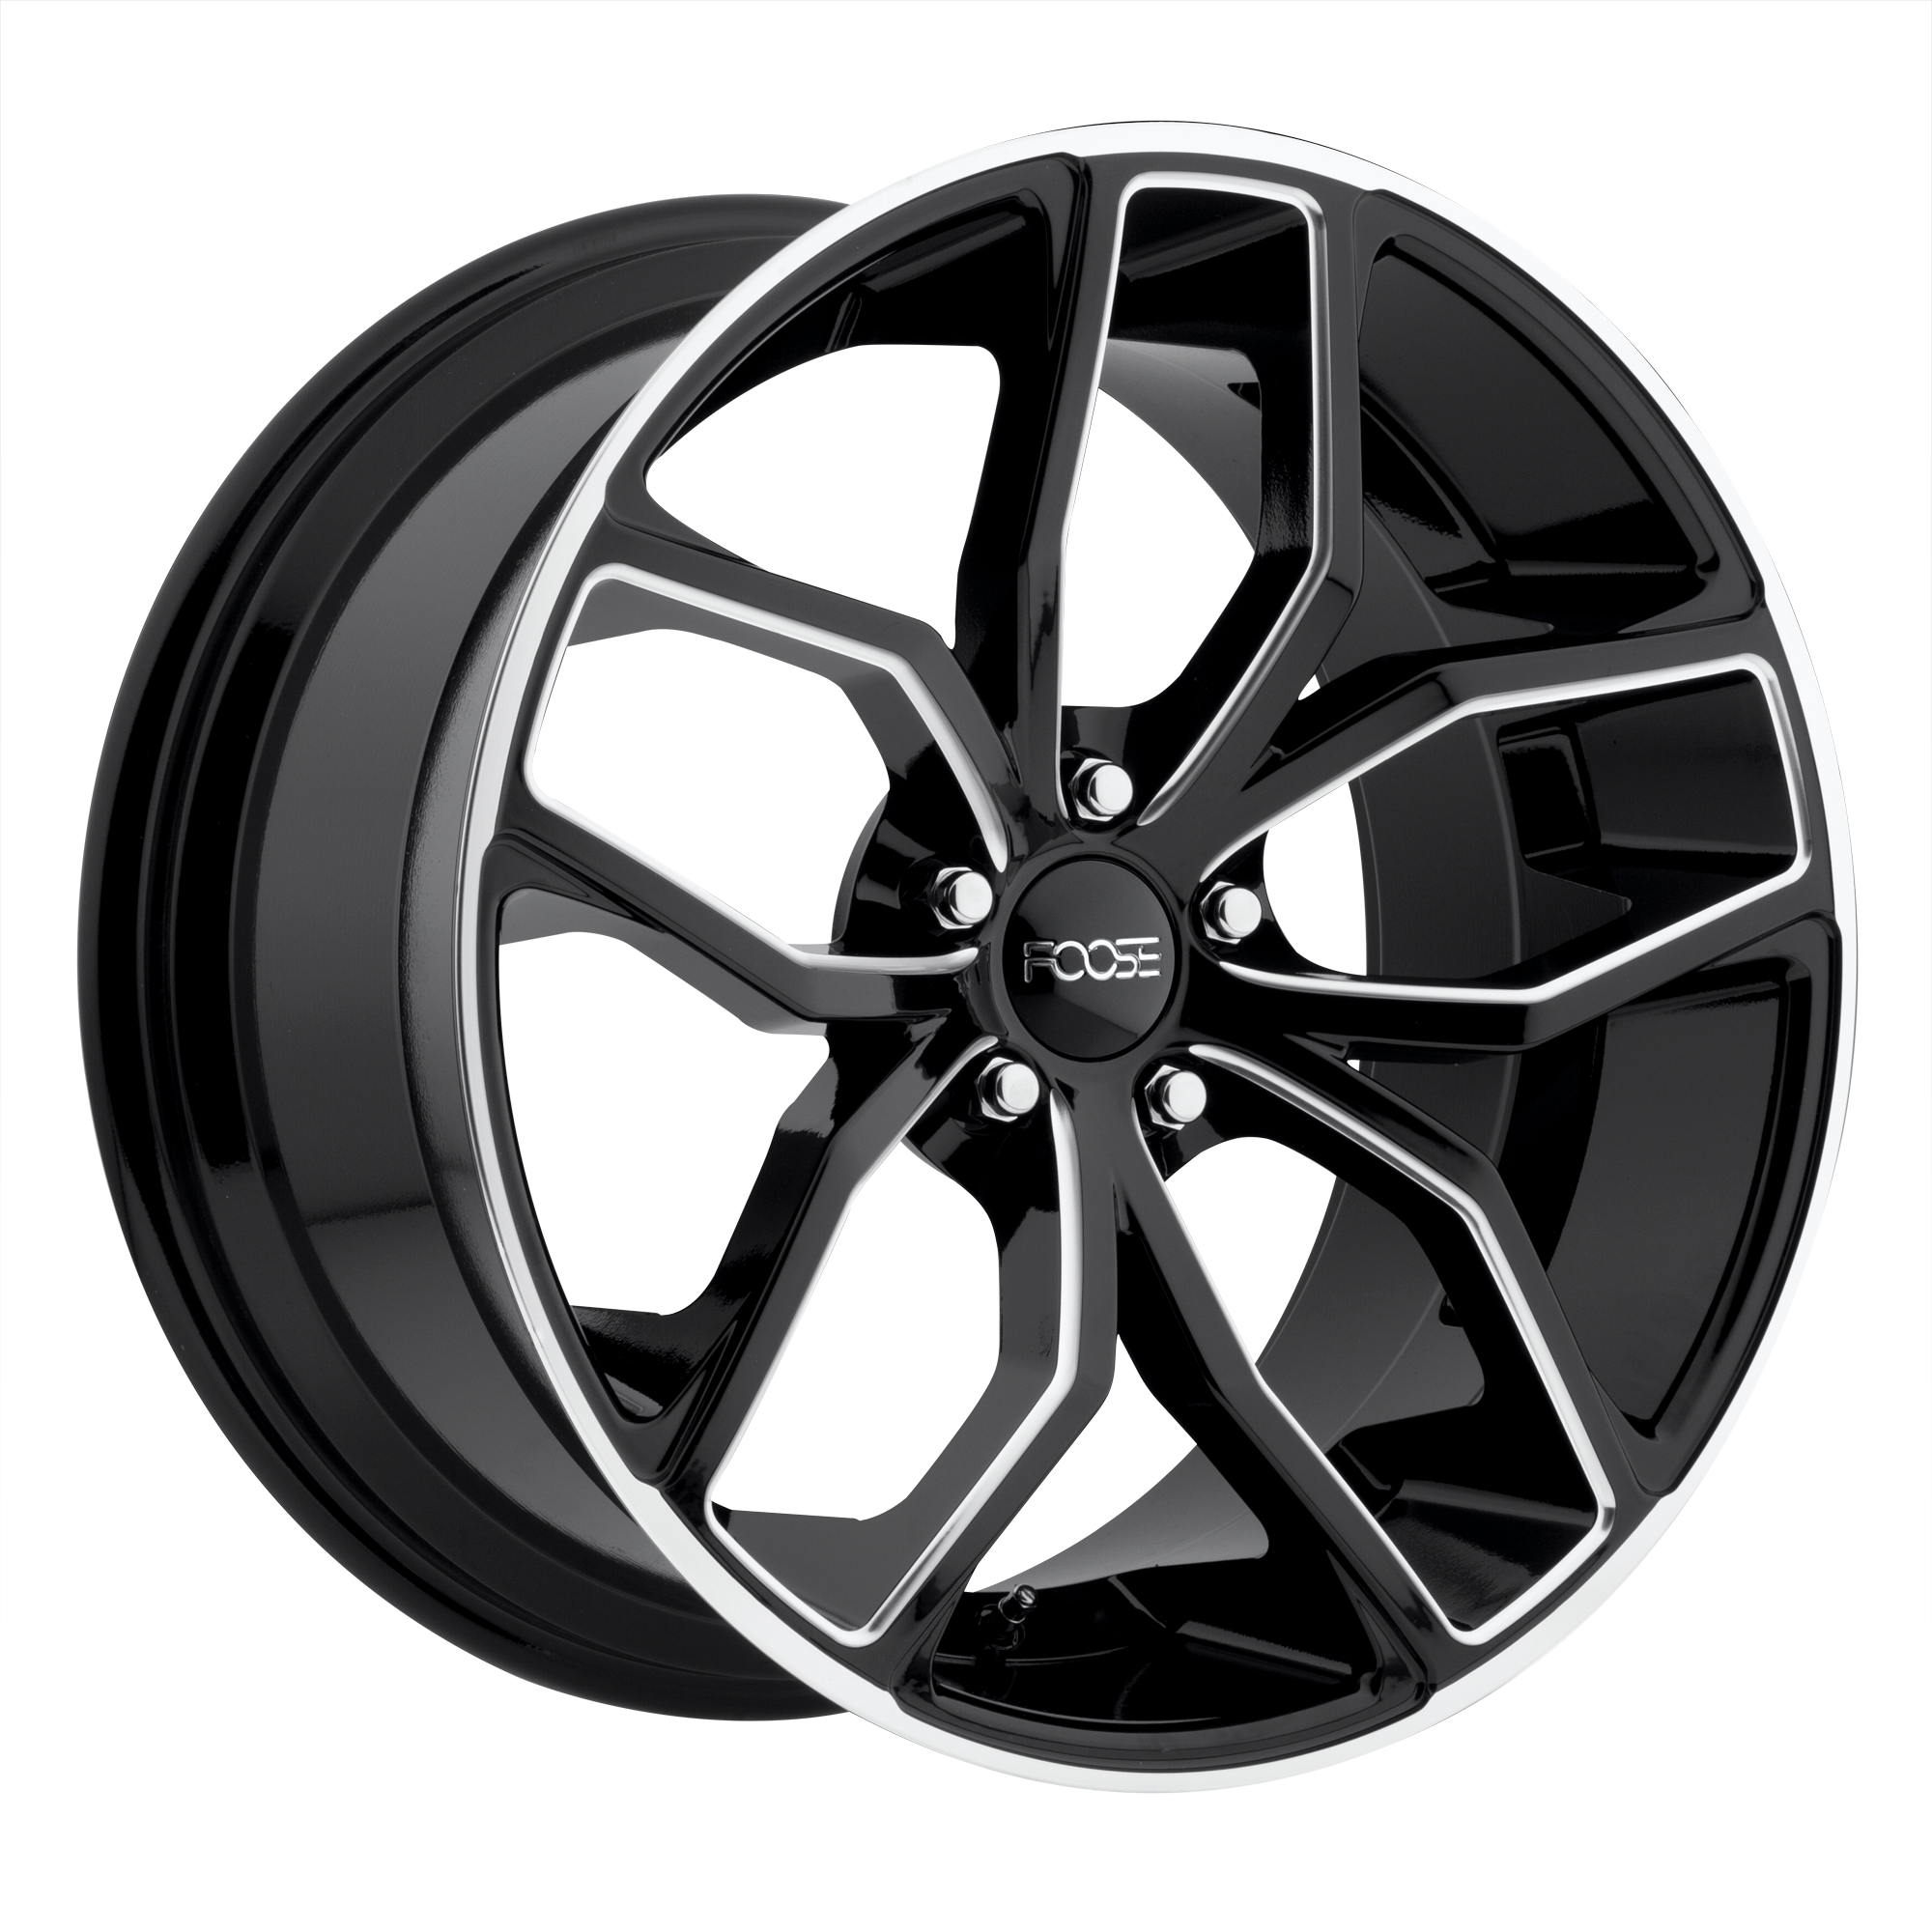 OUTCAST 20x8.5 5x114.30 GLOSS BLACK MILLED (35 mm) - Tires and Engine Performance